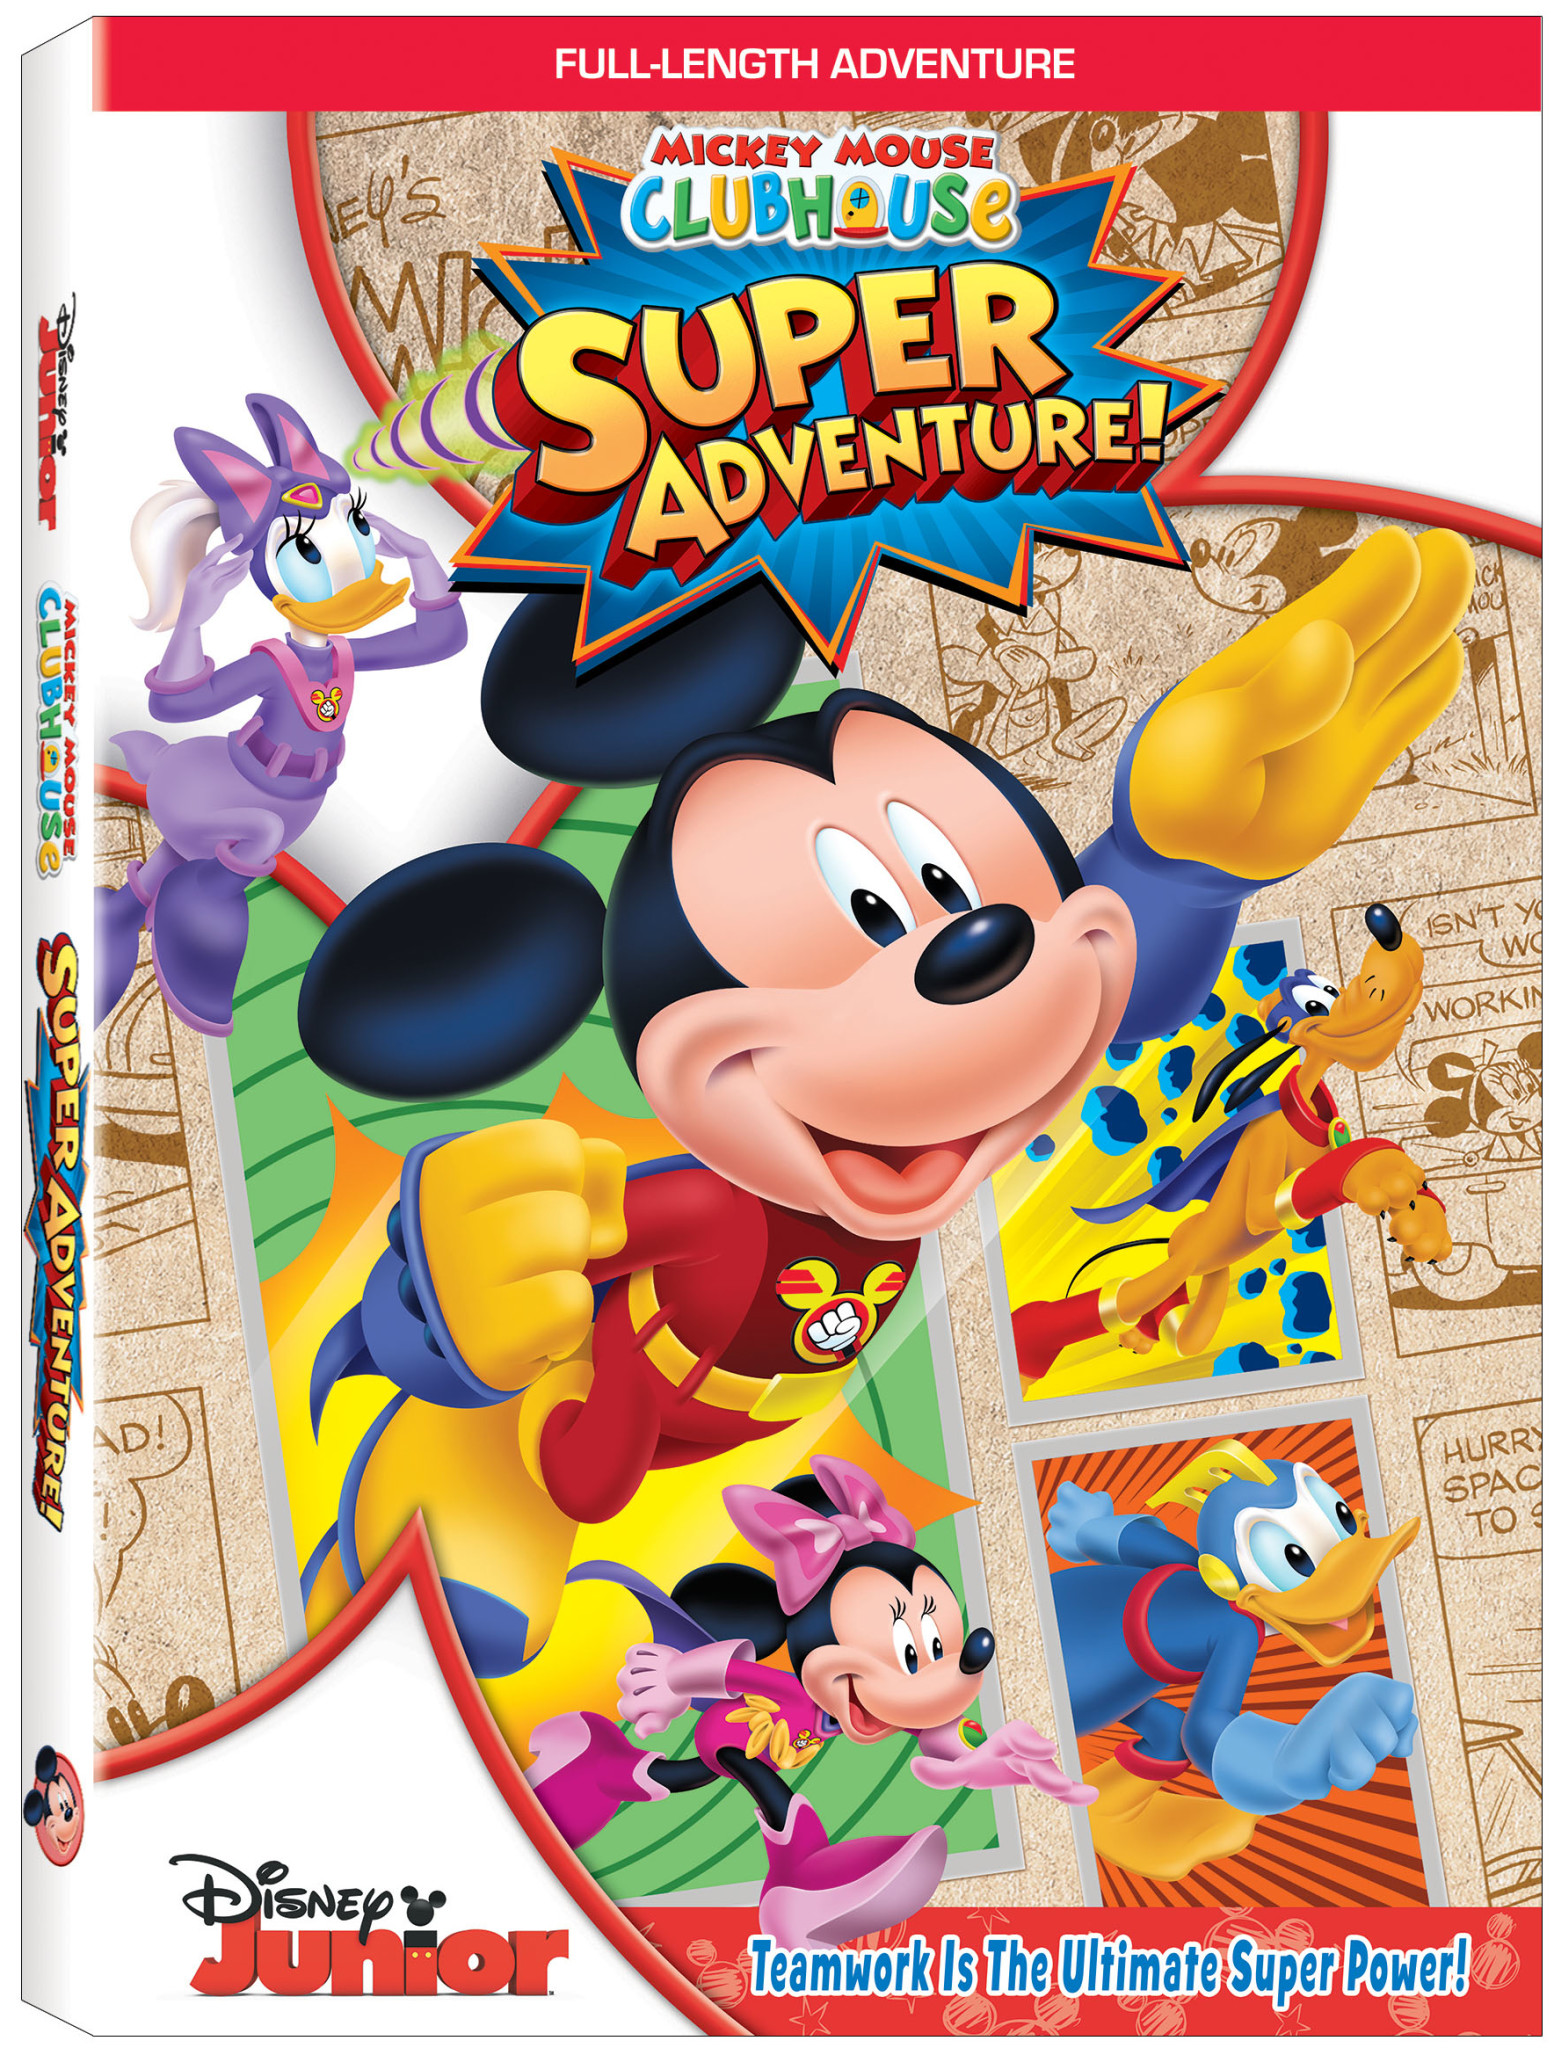 Up, Up and Away – Mickey Mouse Clubhouse: Super Adventure